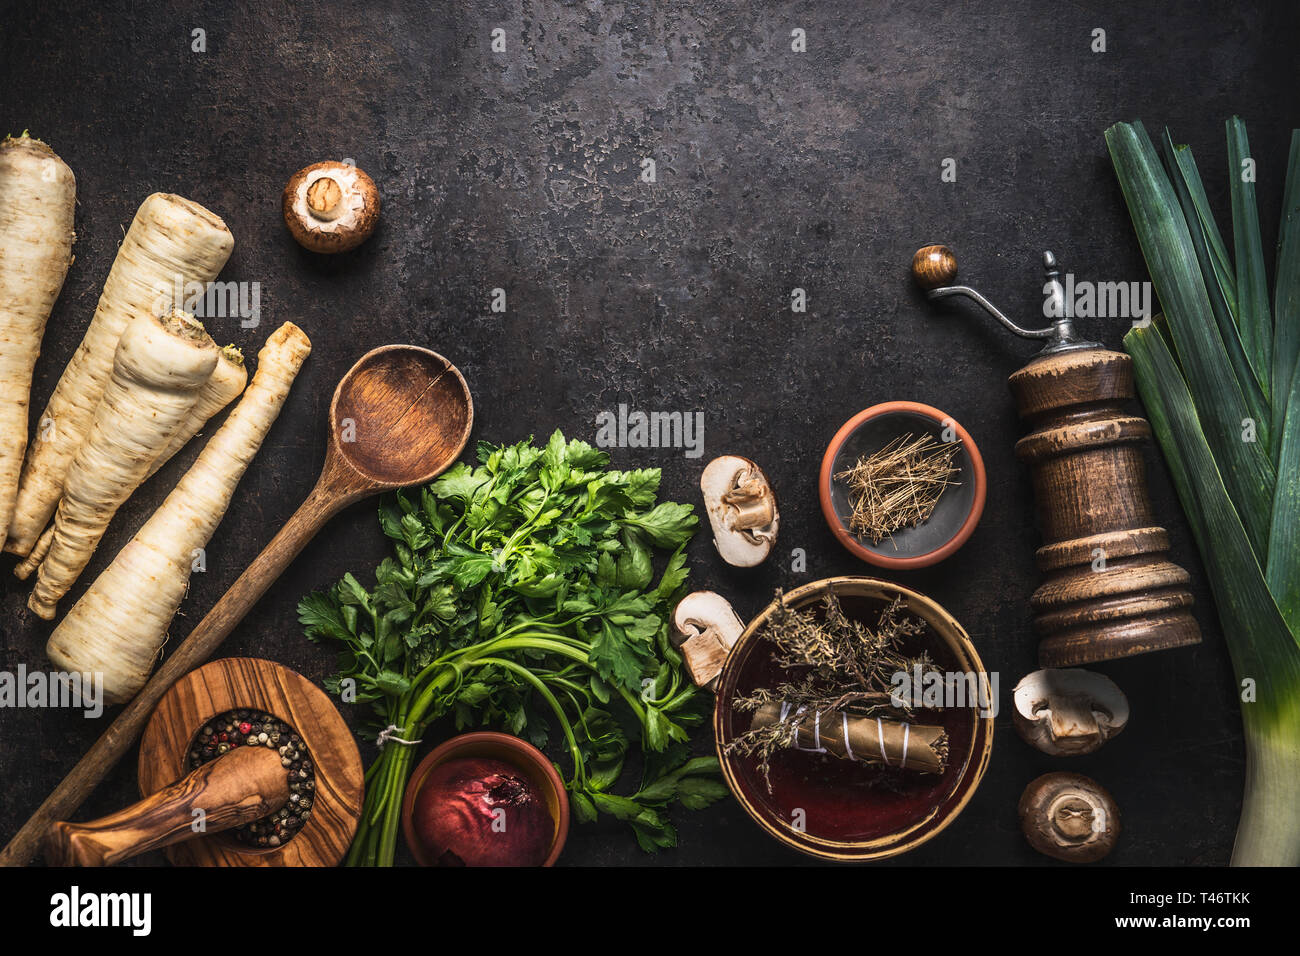 https://c8.alamy.com/comp/T46TKK/rustic-food-background-with-parsley-root-vegetables-herbsspices-leek-and-champignon-mushrooms-on-dark-rustic-table-with-kitchen-utensils-top-view-T46TKK.jpg